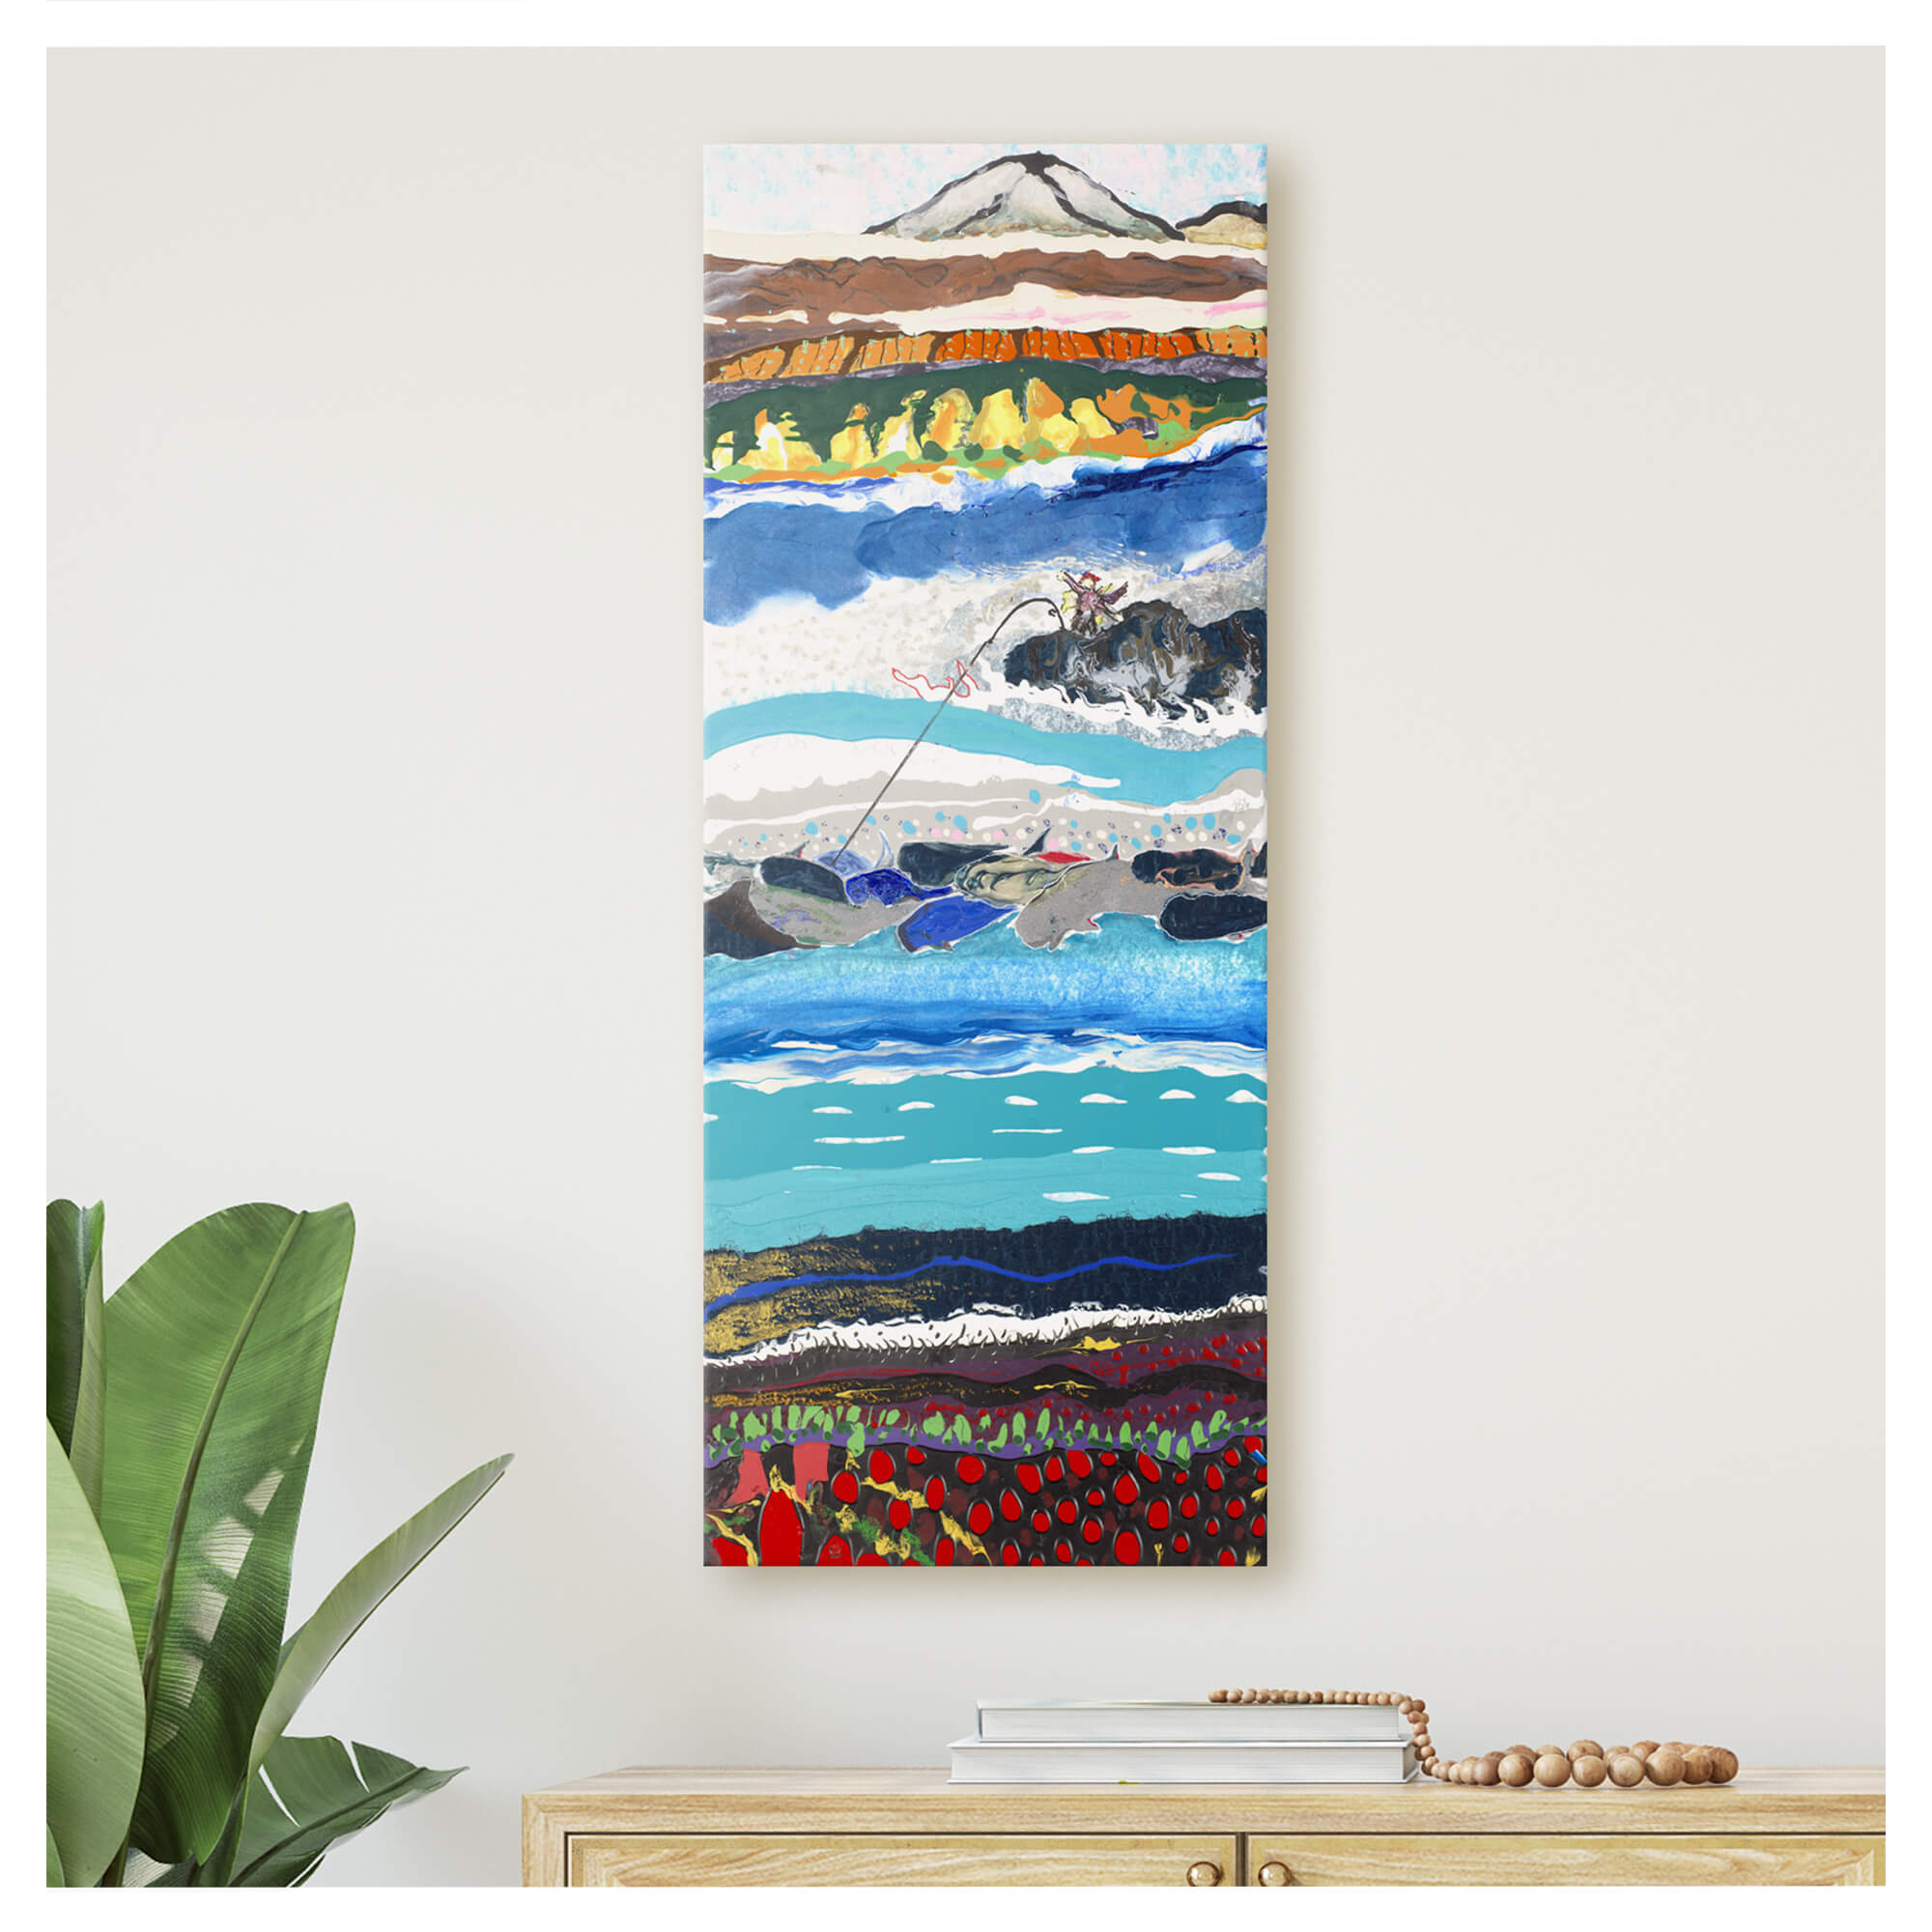 canvas art print featuring an abstract painting of the ocean with a man fishing by Hawaii artist Robert Hazzard